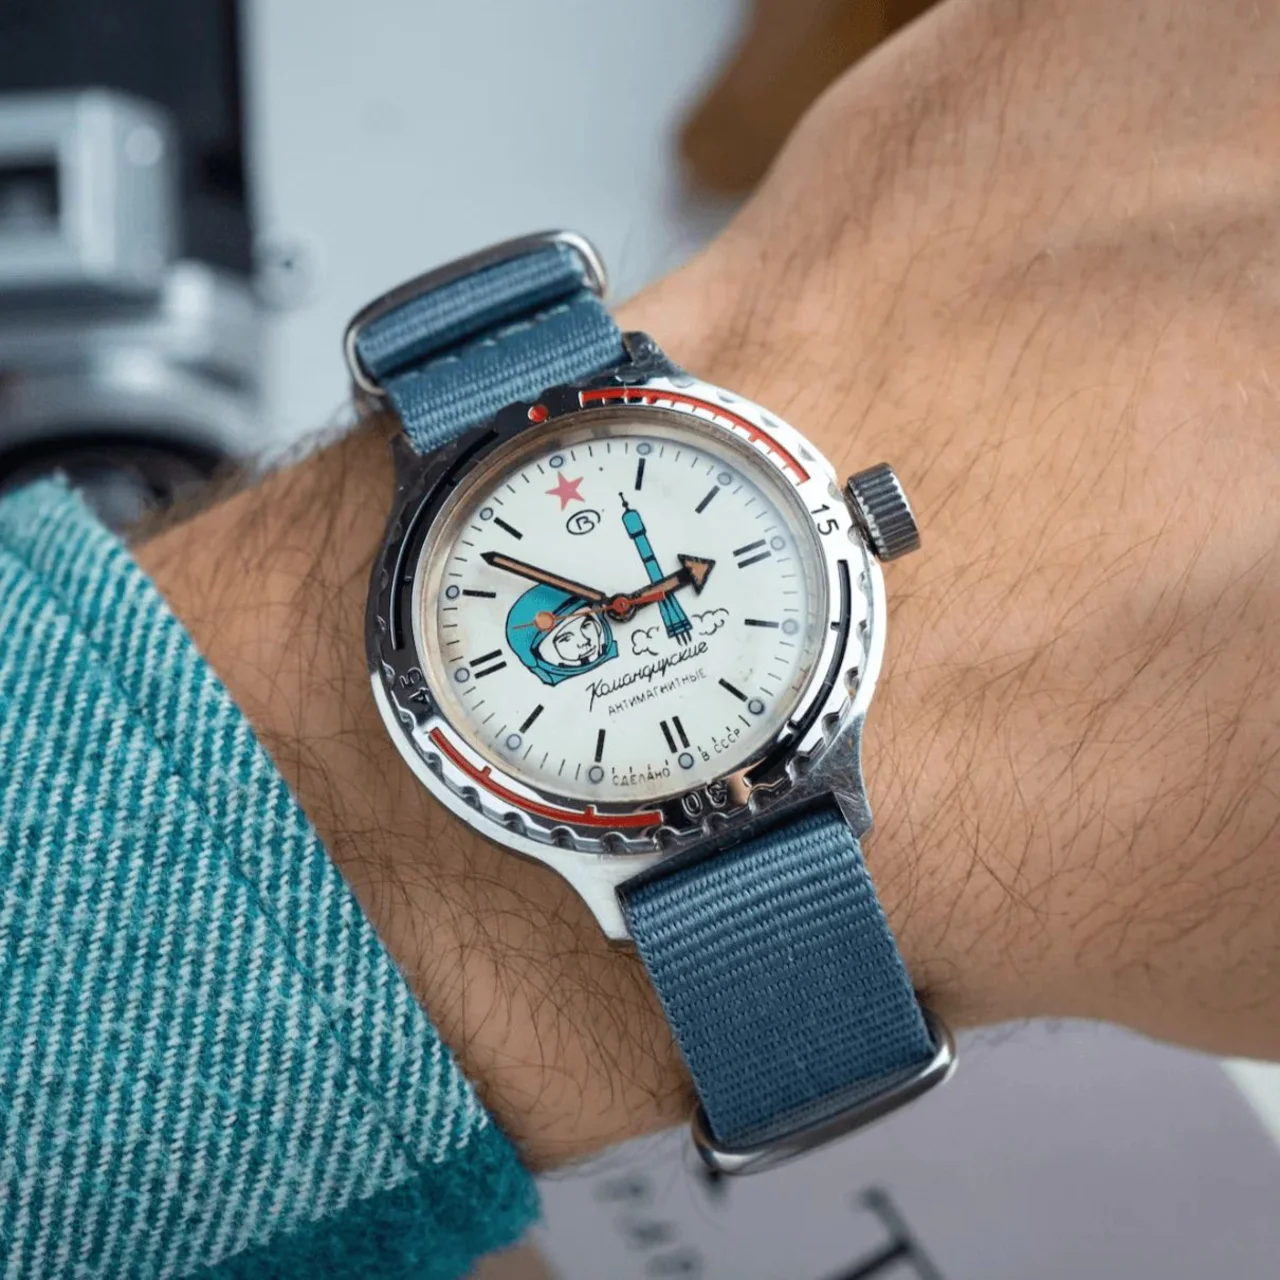 Soviet Watches: Timepieces from the Eastern Bloc